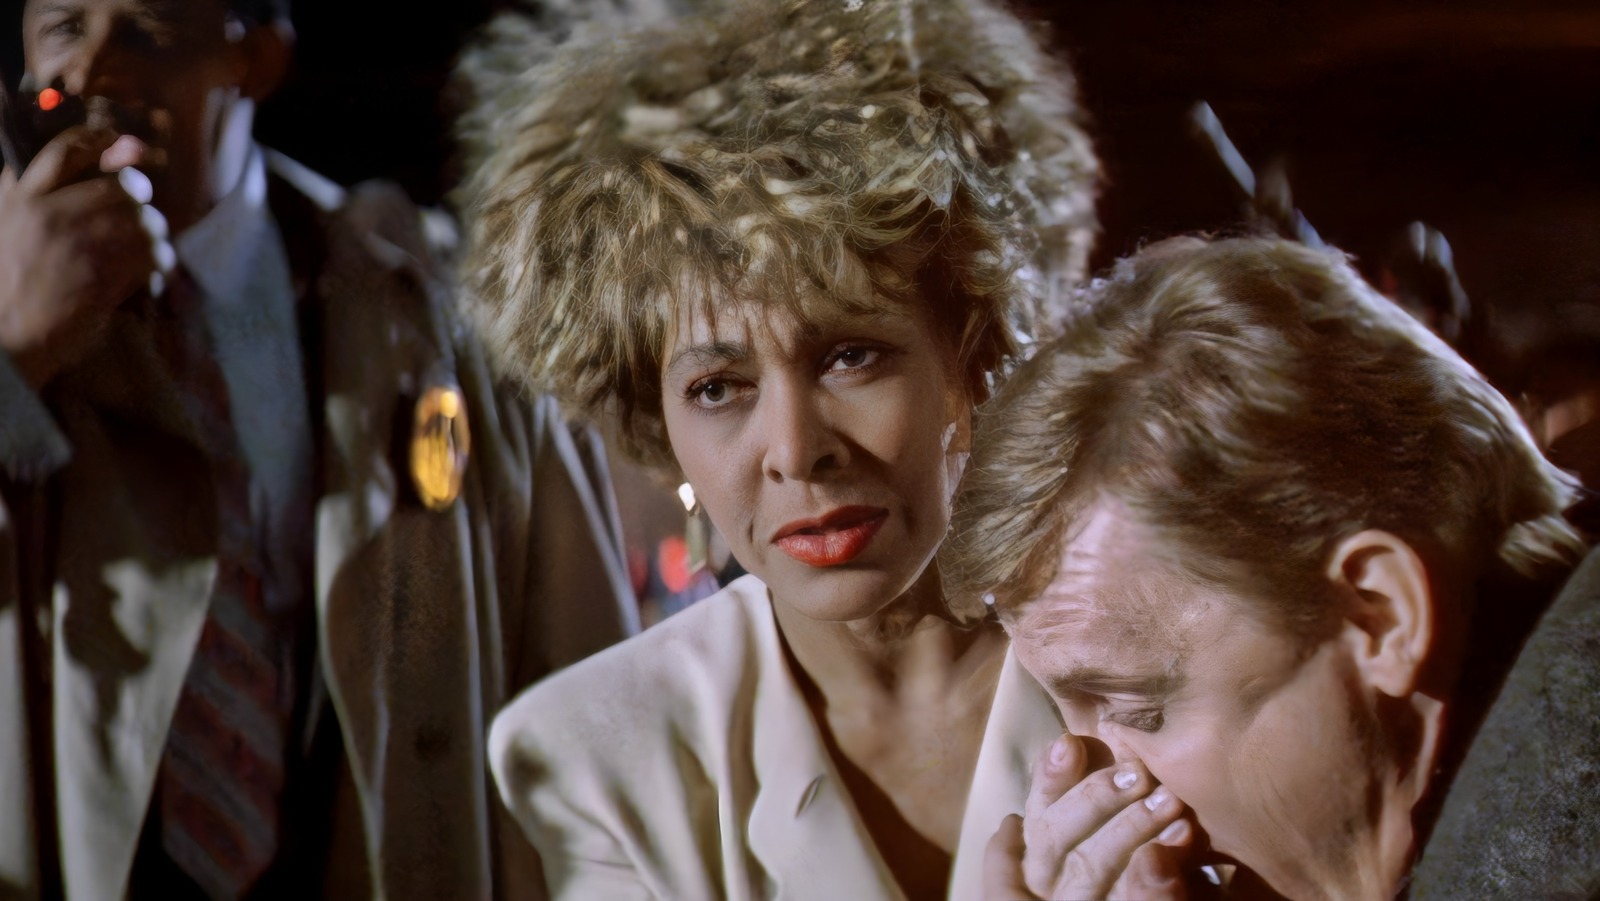 Remember That Time Tina Turner Played LA’s Mayor In Last Action Hero’s Jack Slater Movies? – /Film